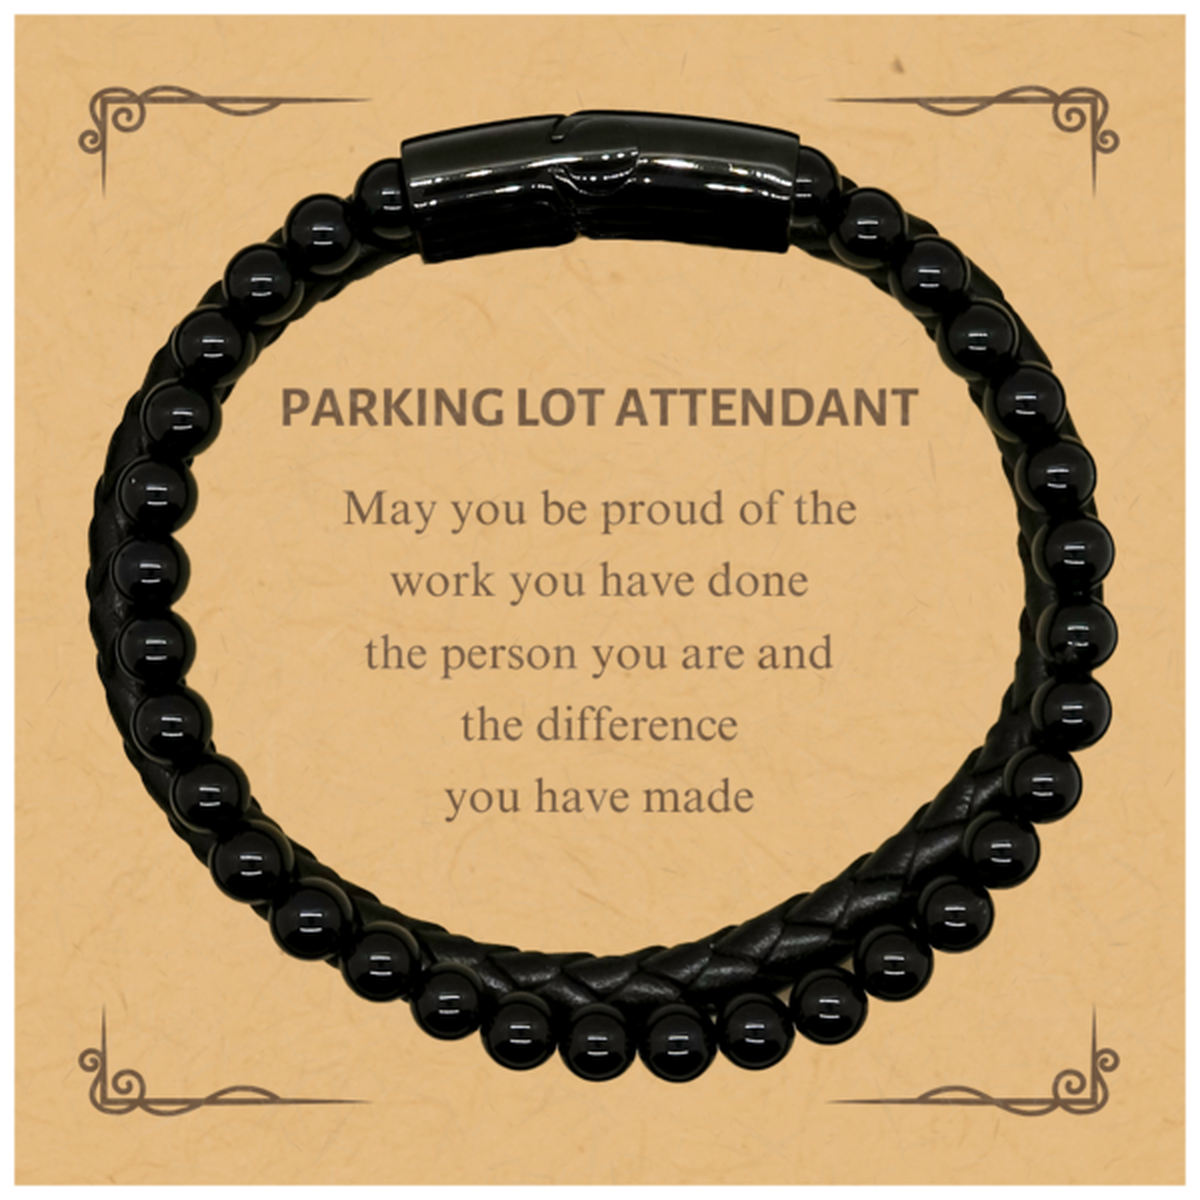 Parking Lot Attendant May you be proud of the work you have done, Retirement Parking Lot Attendant Stone Leather Bracelets for Colleague Appreciation Gifts Amazing for Parking Lot Attendant